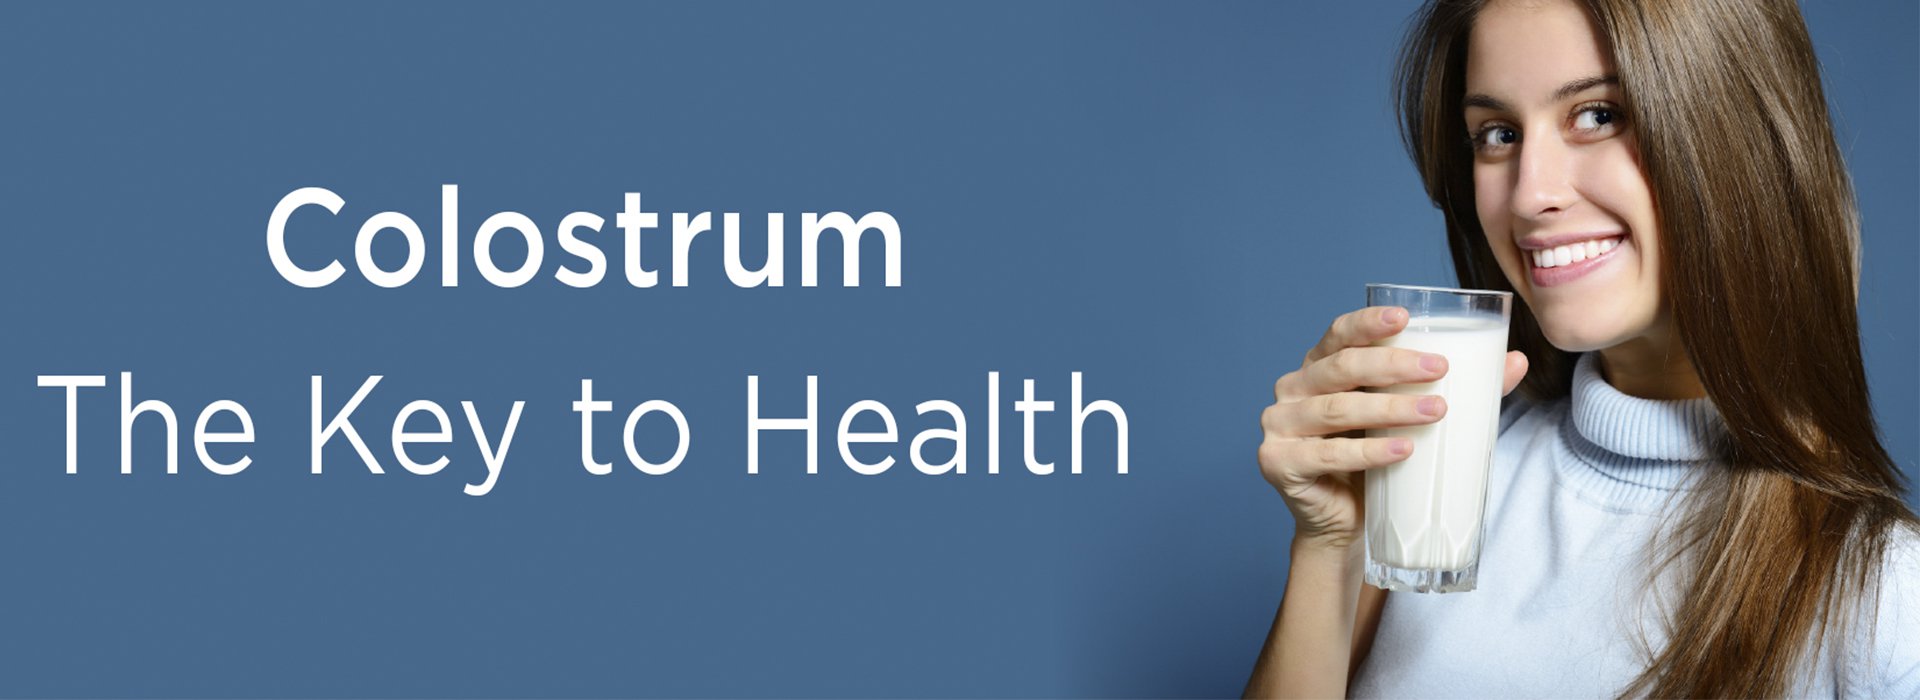 New Image International: Colostrum – The Key To Health